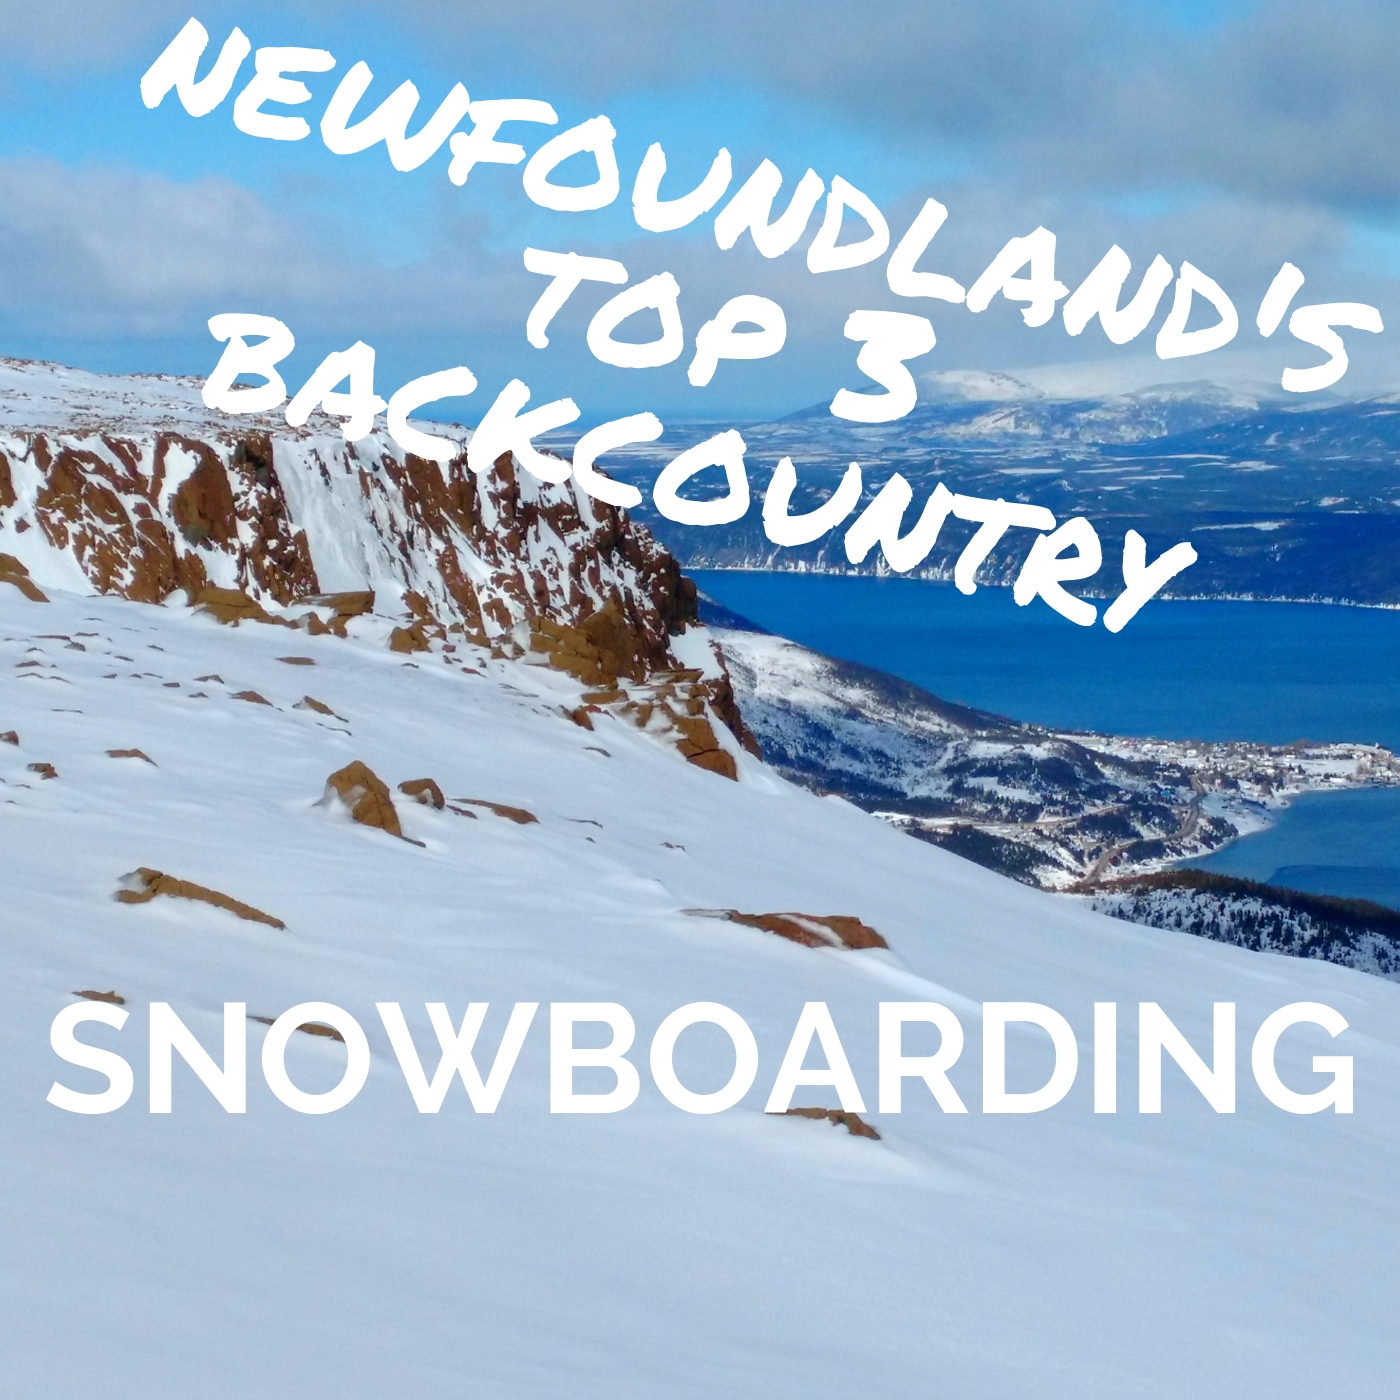 Newfoundland's top 3 backcountry snowboarding spots, Tablelands, Backcountry snowboarding Gros Morne, Wildly Intrepid